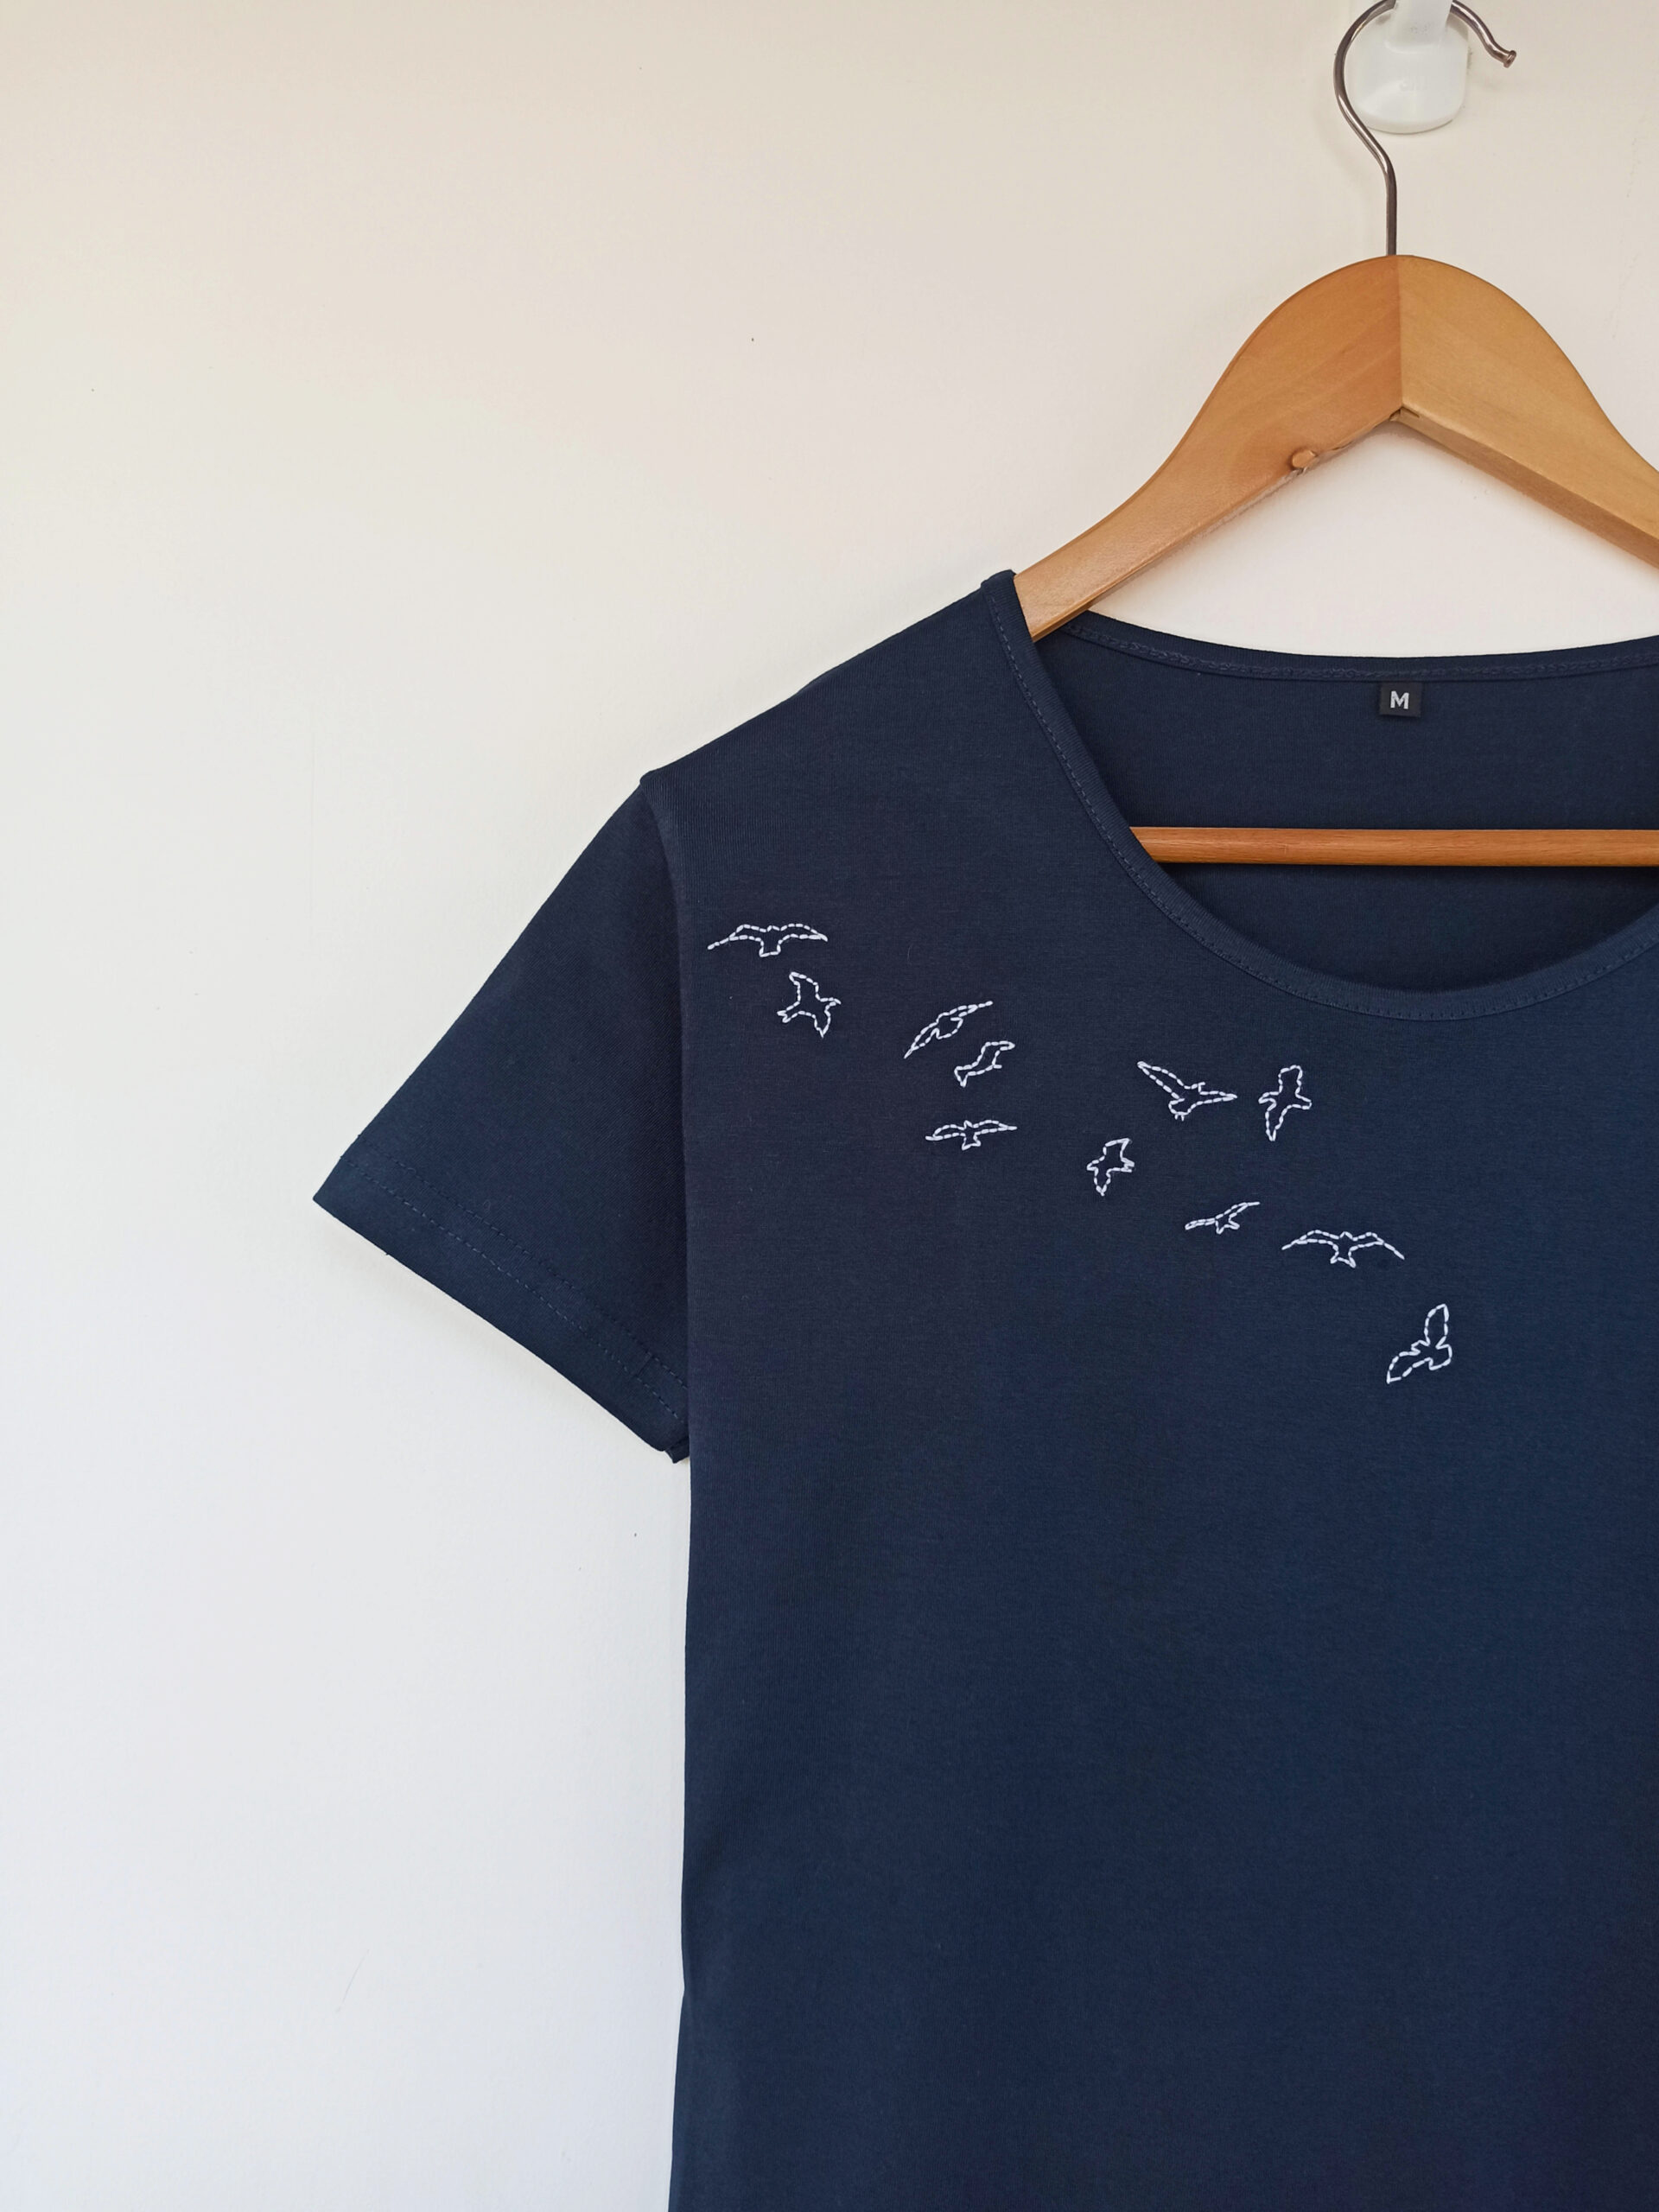 A-dam white organic T-shirt with Flying birds embroidery